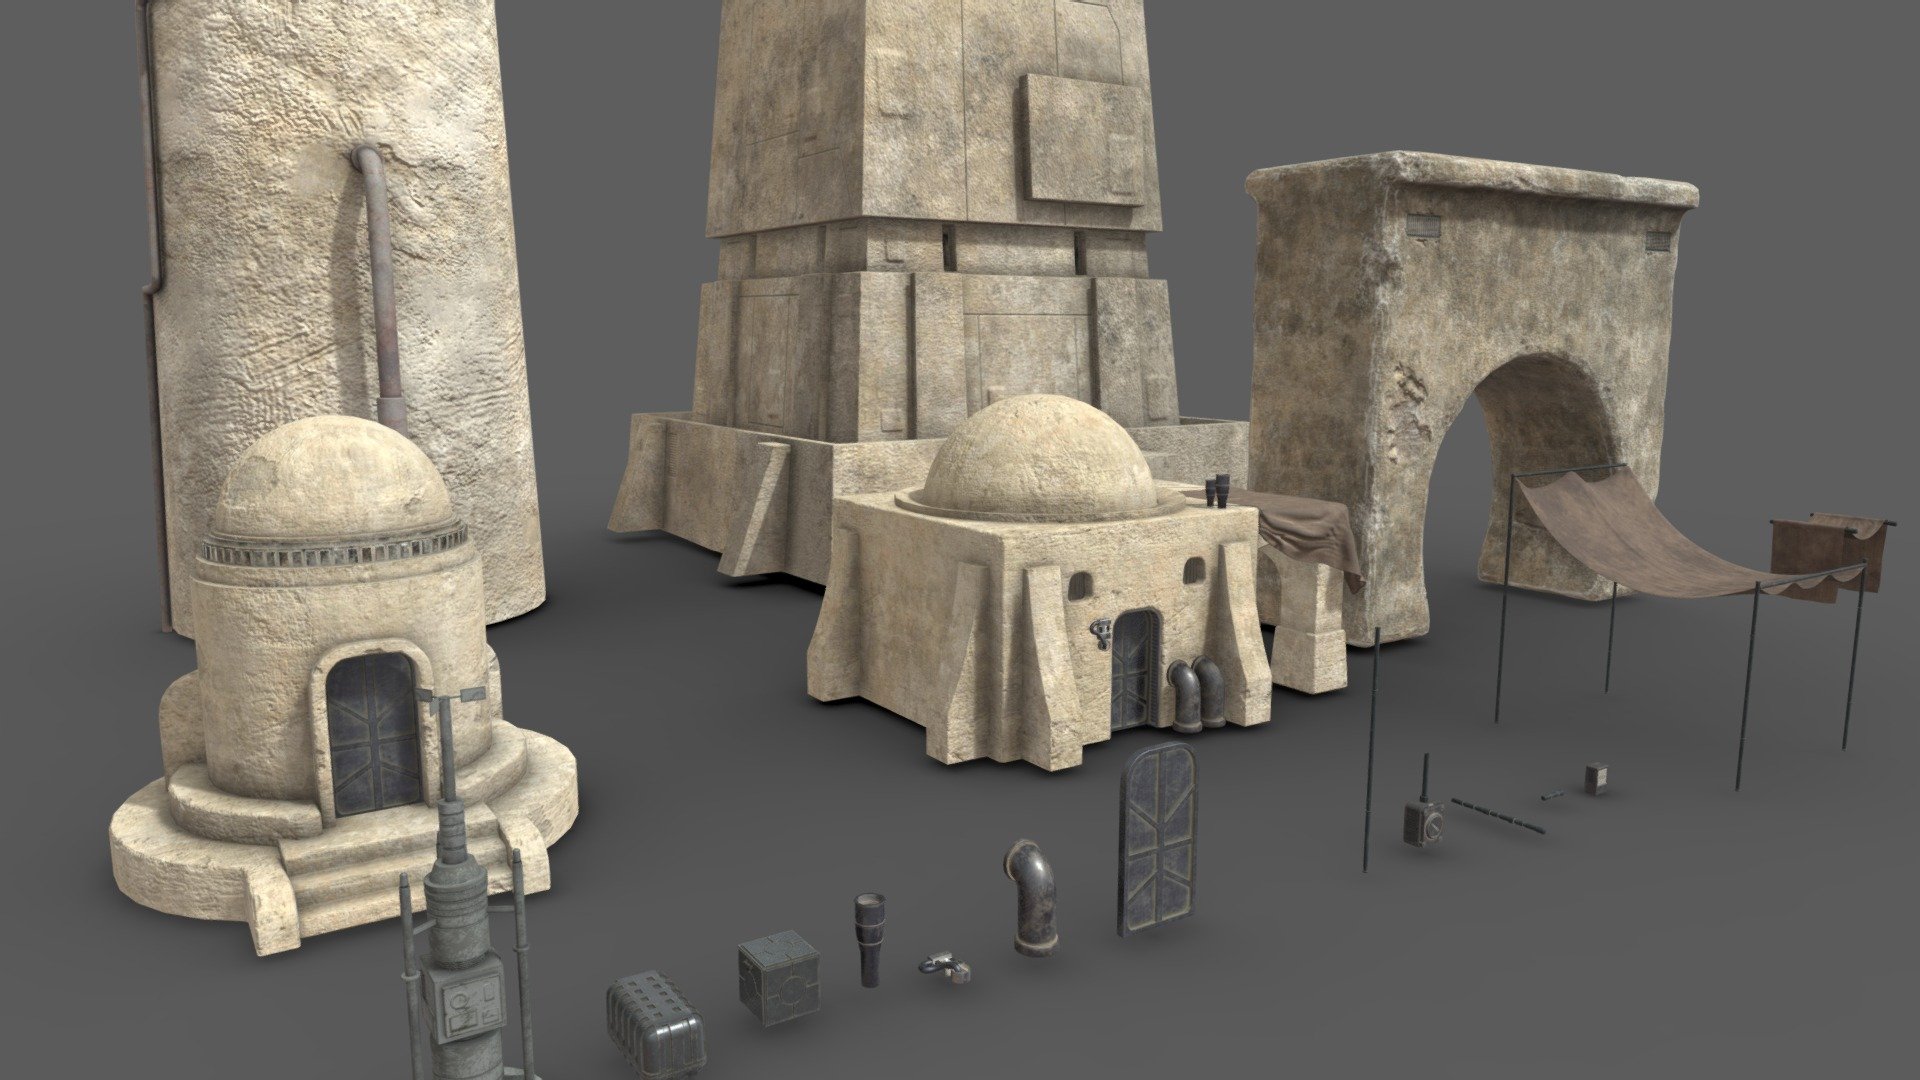 Star wars kitbash pack

a collection of architecture and props from Mos Eisley, Tattoine from star wars

4K, 2K PBR textures - Tattoine Buildings Kitbash - Download Free 3D model by chuckcg 3d model